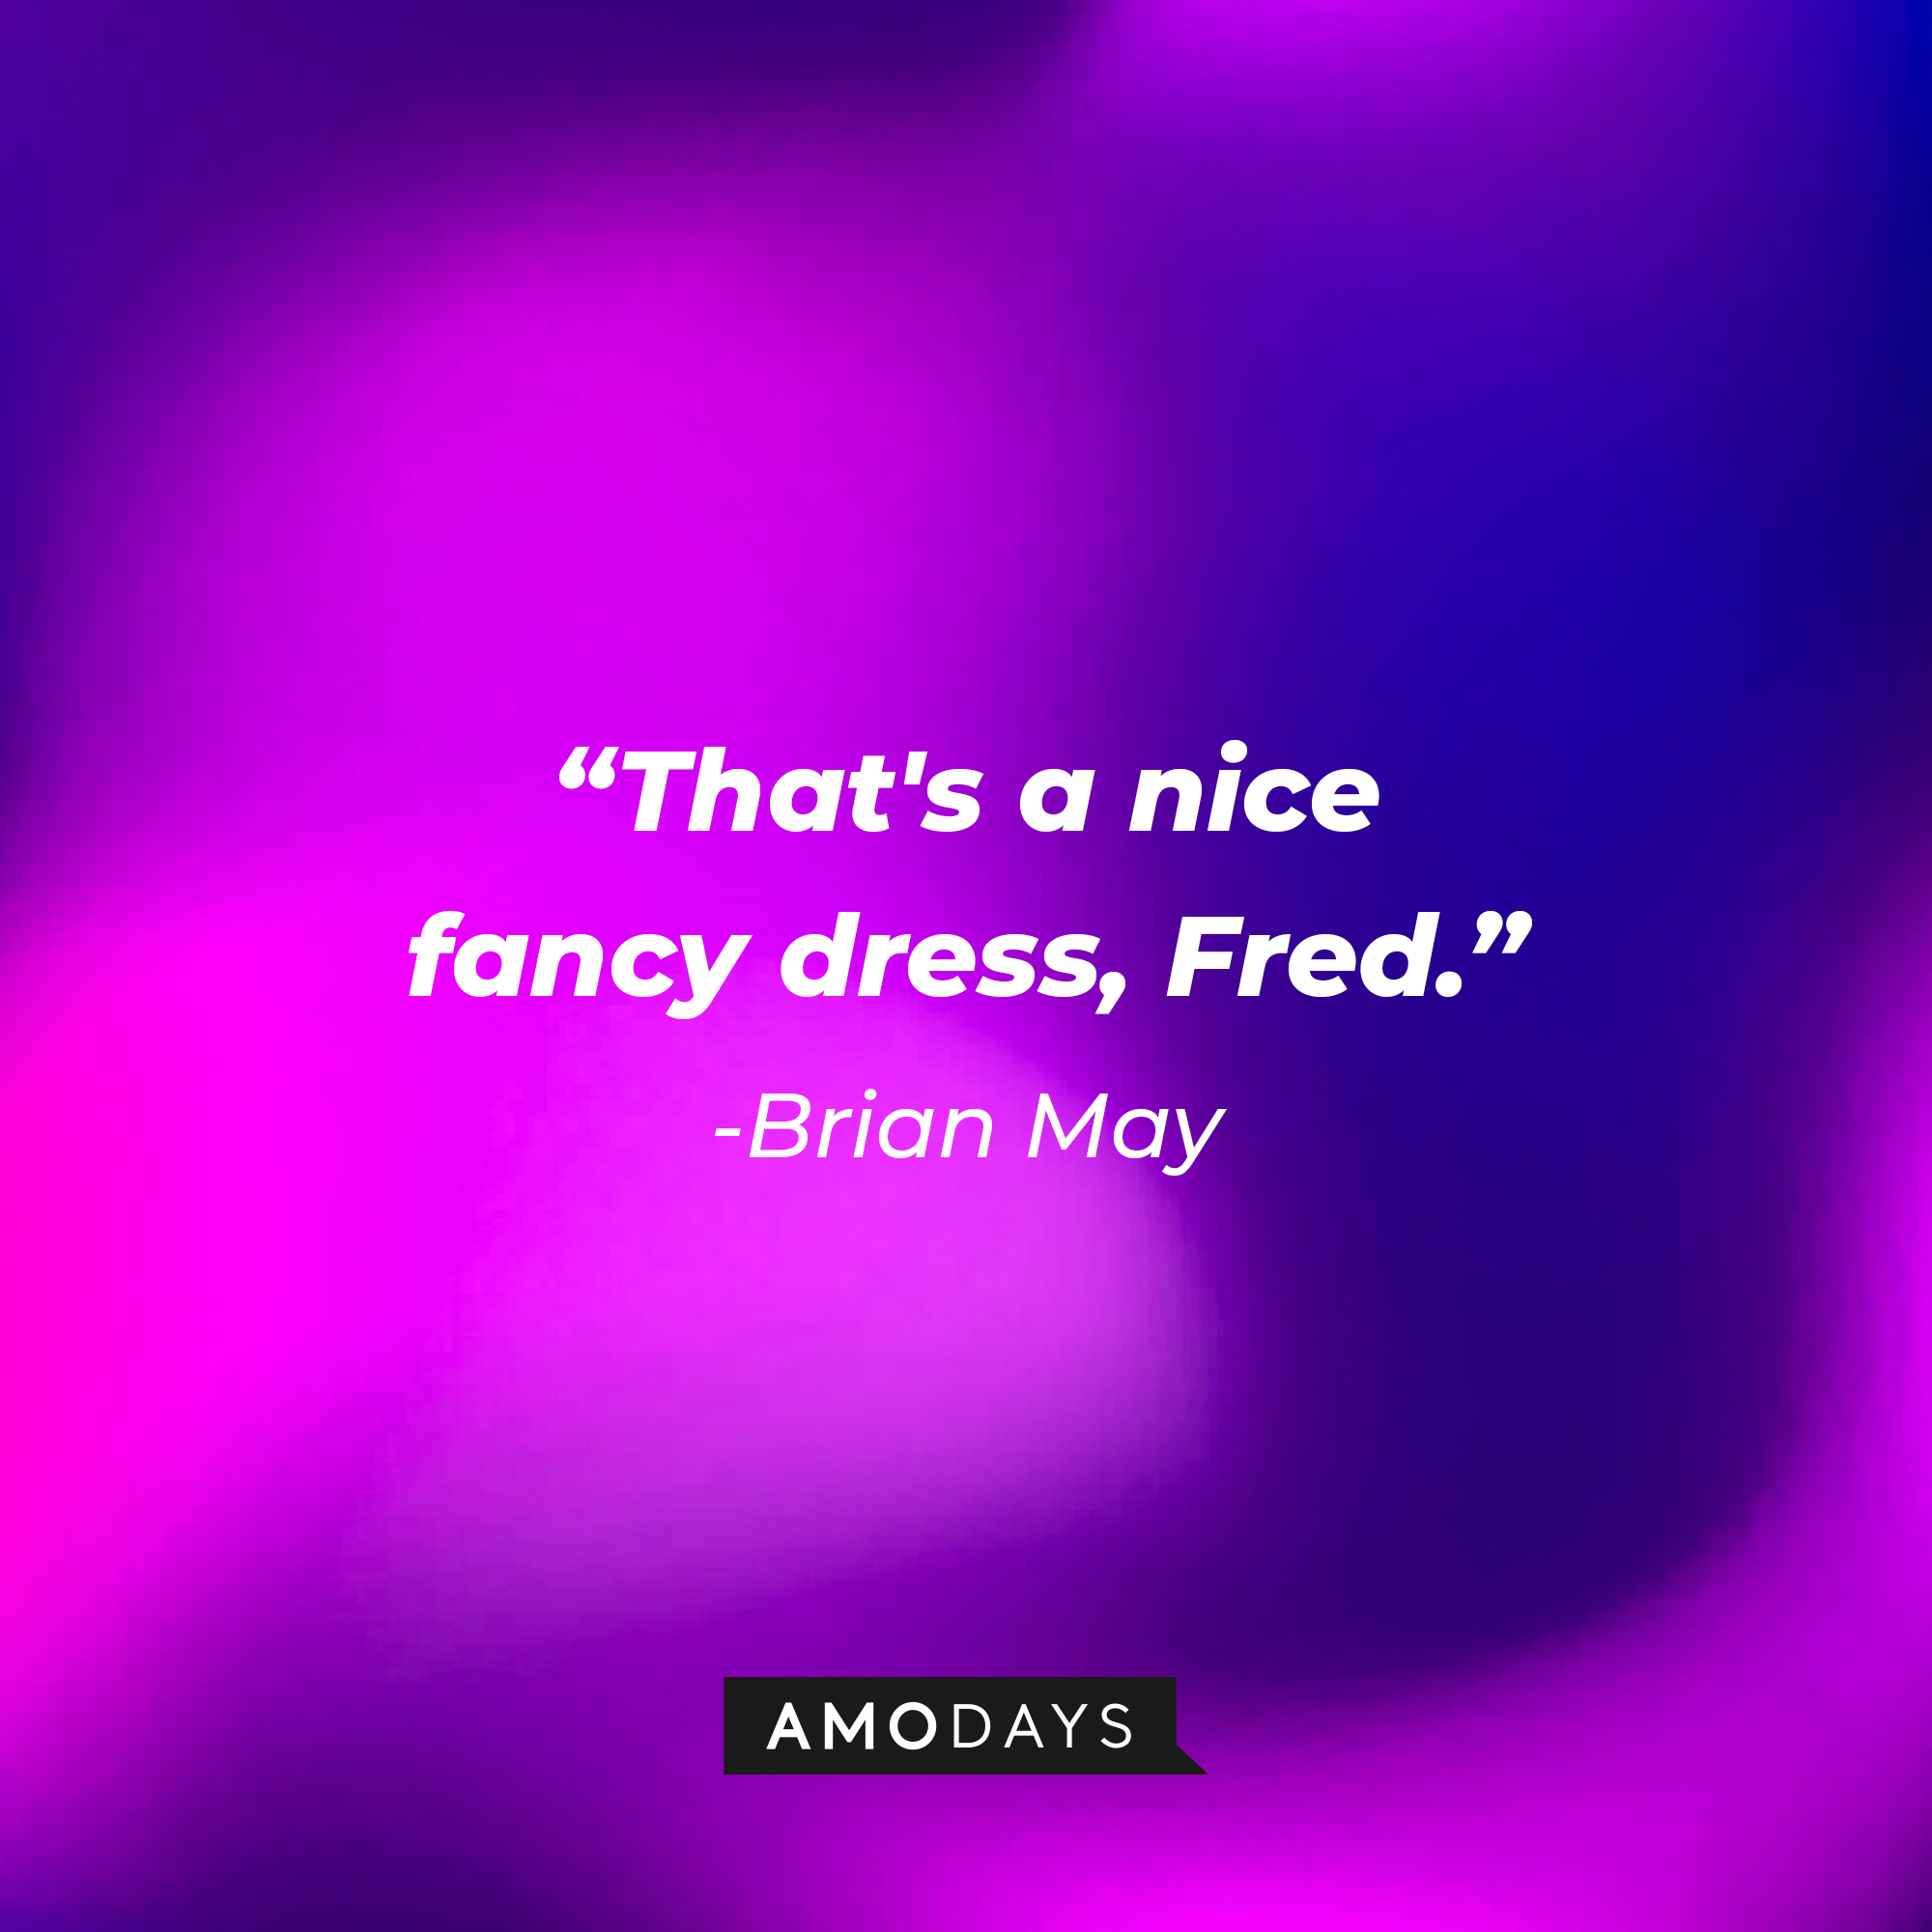 Brian May with his quote: "That's a nice dress, Fred." | Source: Amodays